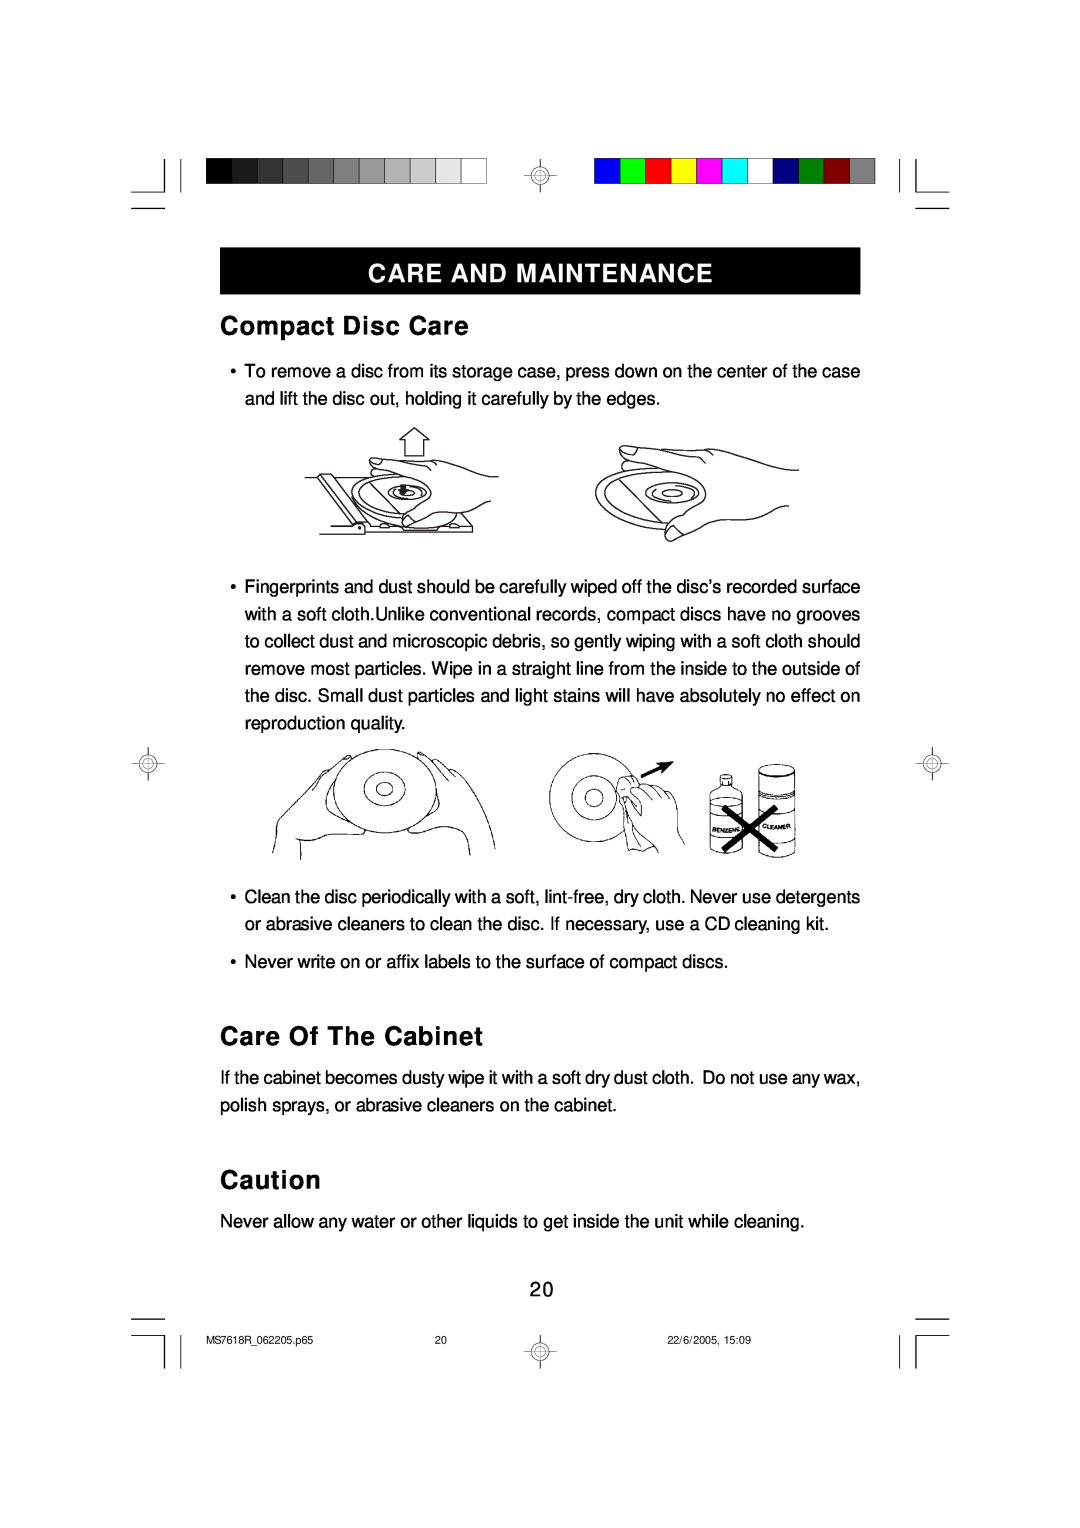 Emerson MS7618R owner manual Care And Maintenance, Compact Disc Care, Care Of The Cabinet 